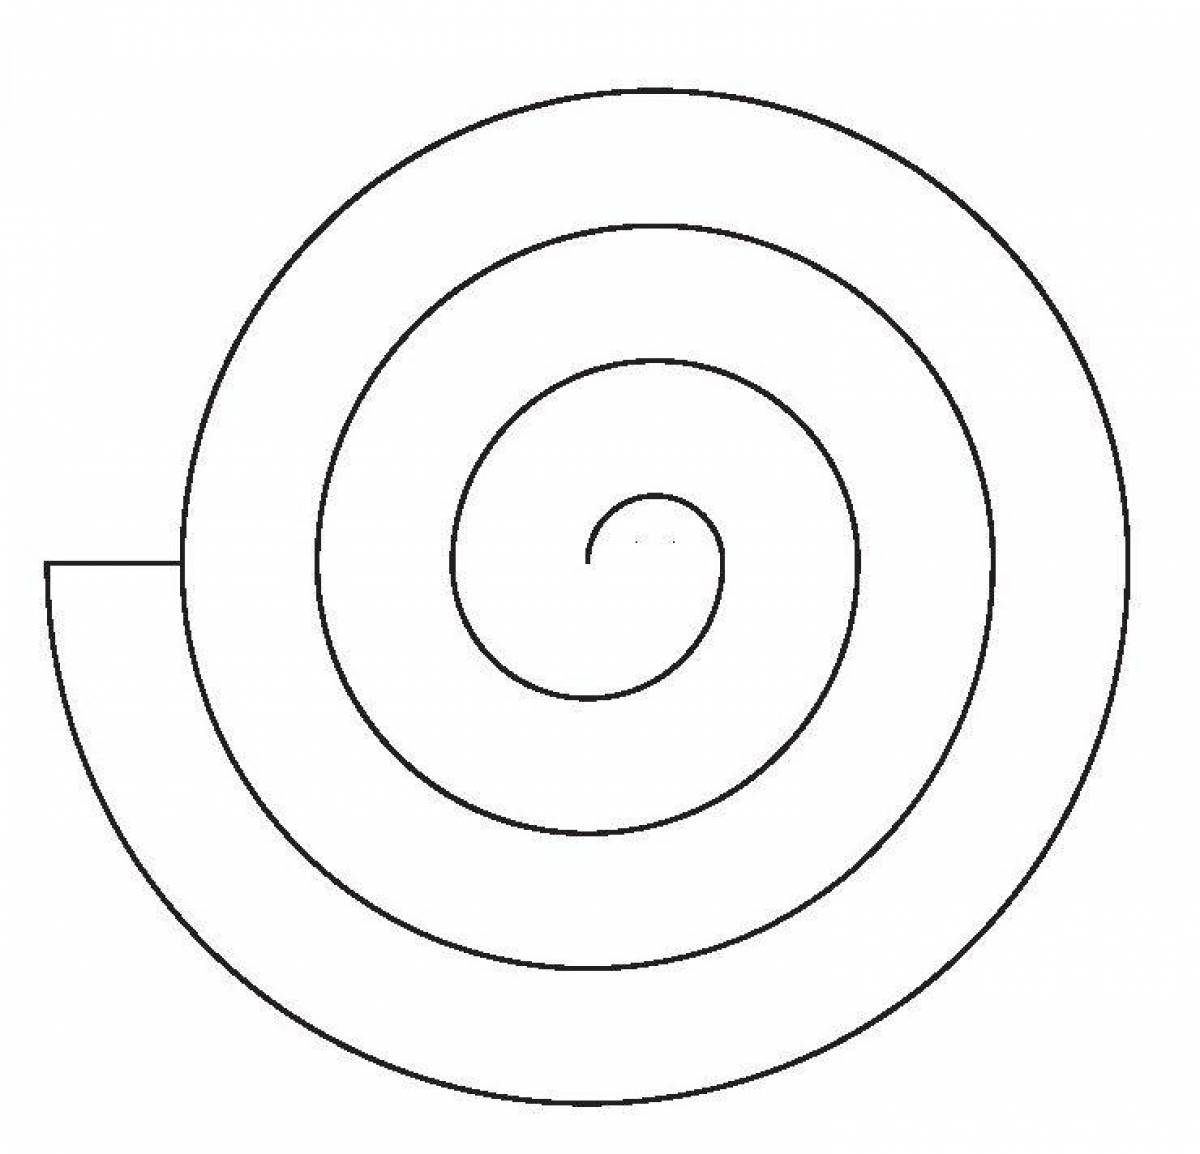 Fancy round spiral coloring